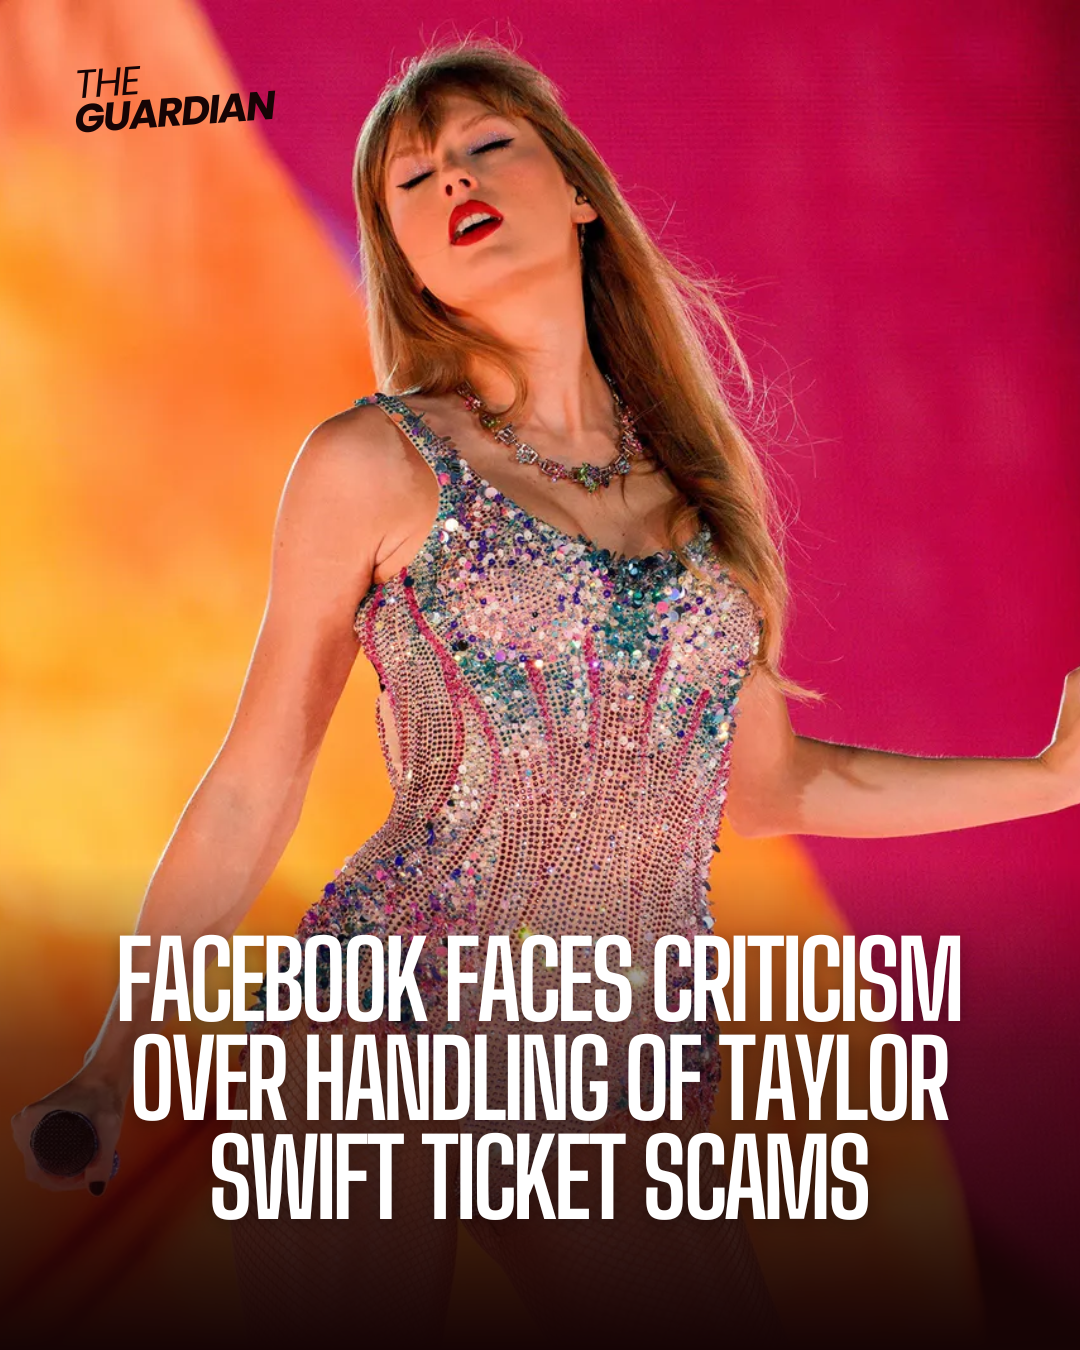 Facebook accounts were hacked and hijacked to sell fake Taylor Swift tickets, and the platform has been blamed for not doing more to prevent the tricksters.